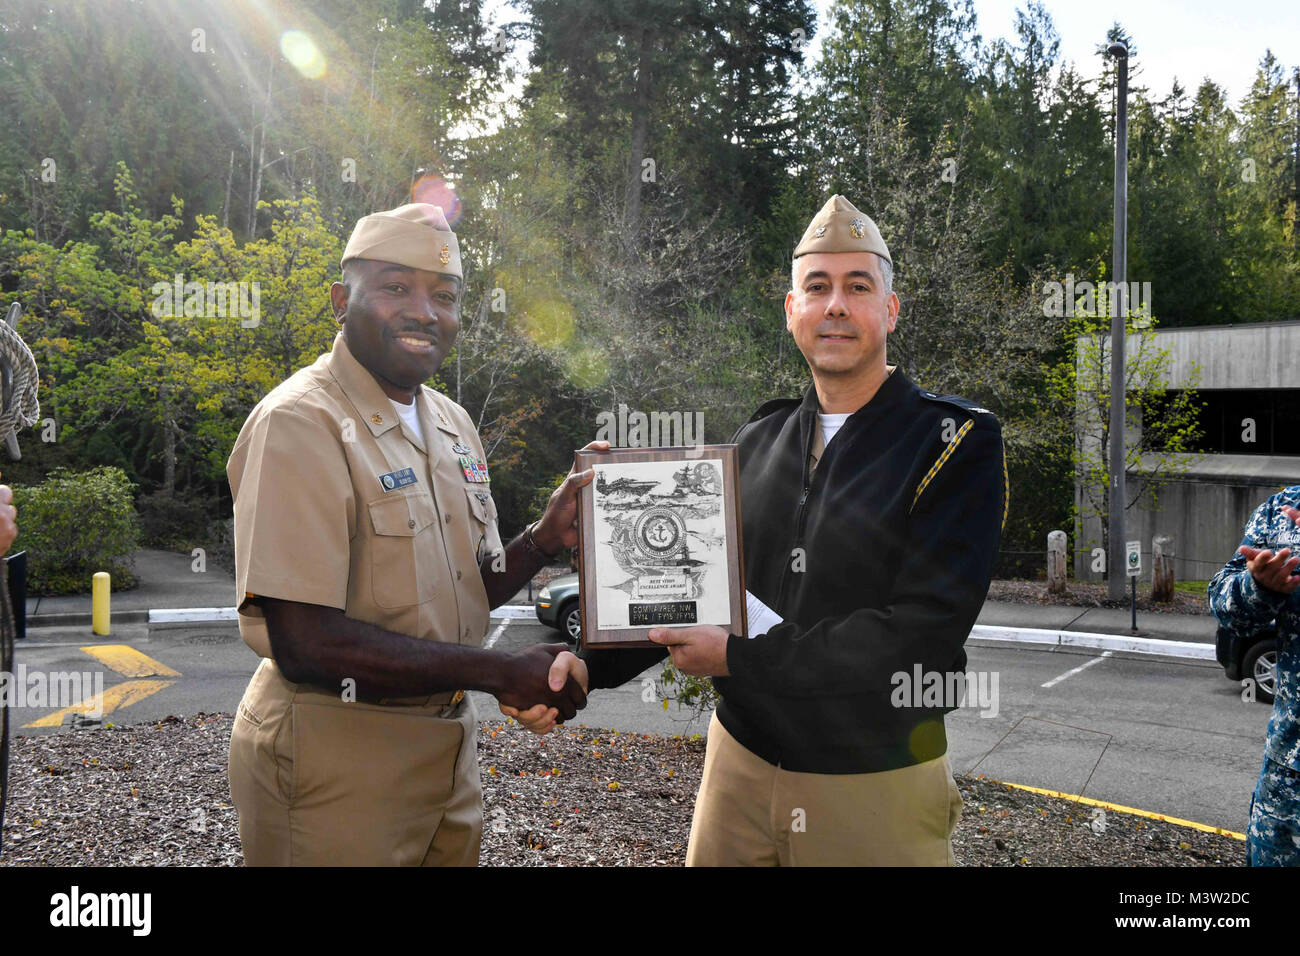 170428-N-EC099-015 SILVERDALE, Wash. (April 28, 2017) Capt. Tom Zwolfer, chief of staff, Navy Region Northwest, (right) presents Senior Chief Navy Counselor Jean-Hero Lamy with the Retention Excellence Award in front of Navy Region Northwest. The Retention Excellence Award is bestowed to commands that meet a minimum score of 90 points on the Annual Command Information Program Review, aggregate Zone ÒAÓ attrition rate less than five percent, and uphold no ÒFailed To SubmitÓ incidences in the Career Navigator System. (U.S. Navy photo by Mass Communication Specialist 3rd Class Charles D. Gaddis I Stock Photo